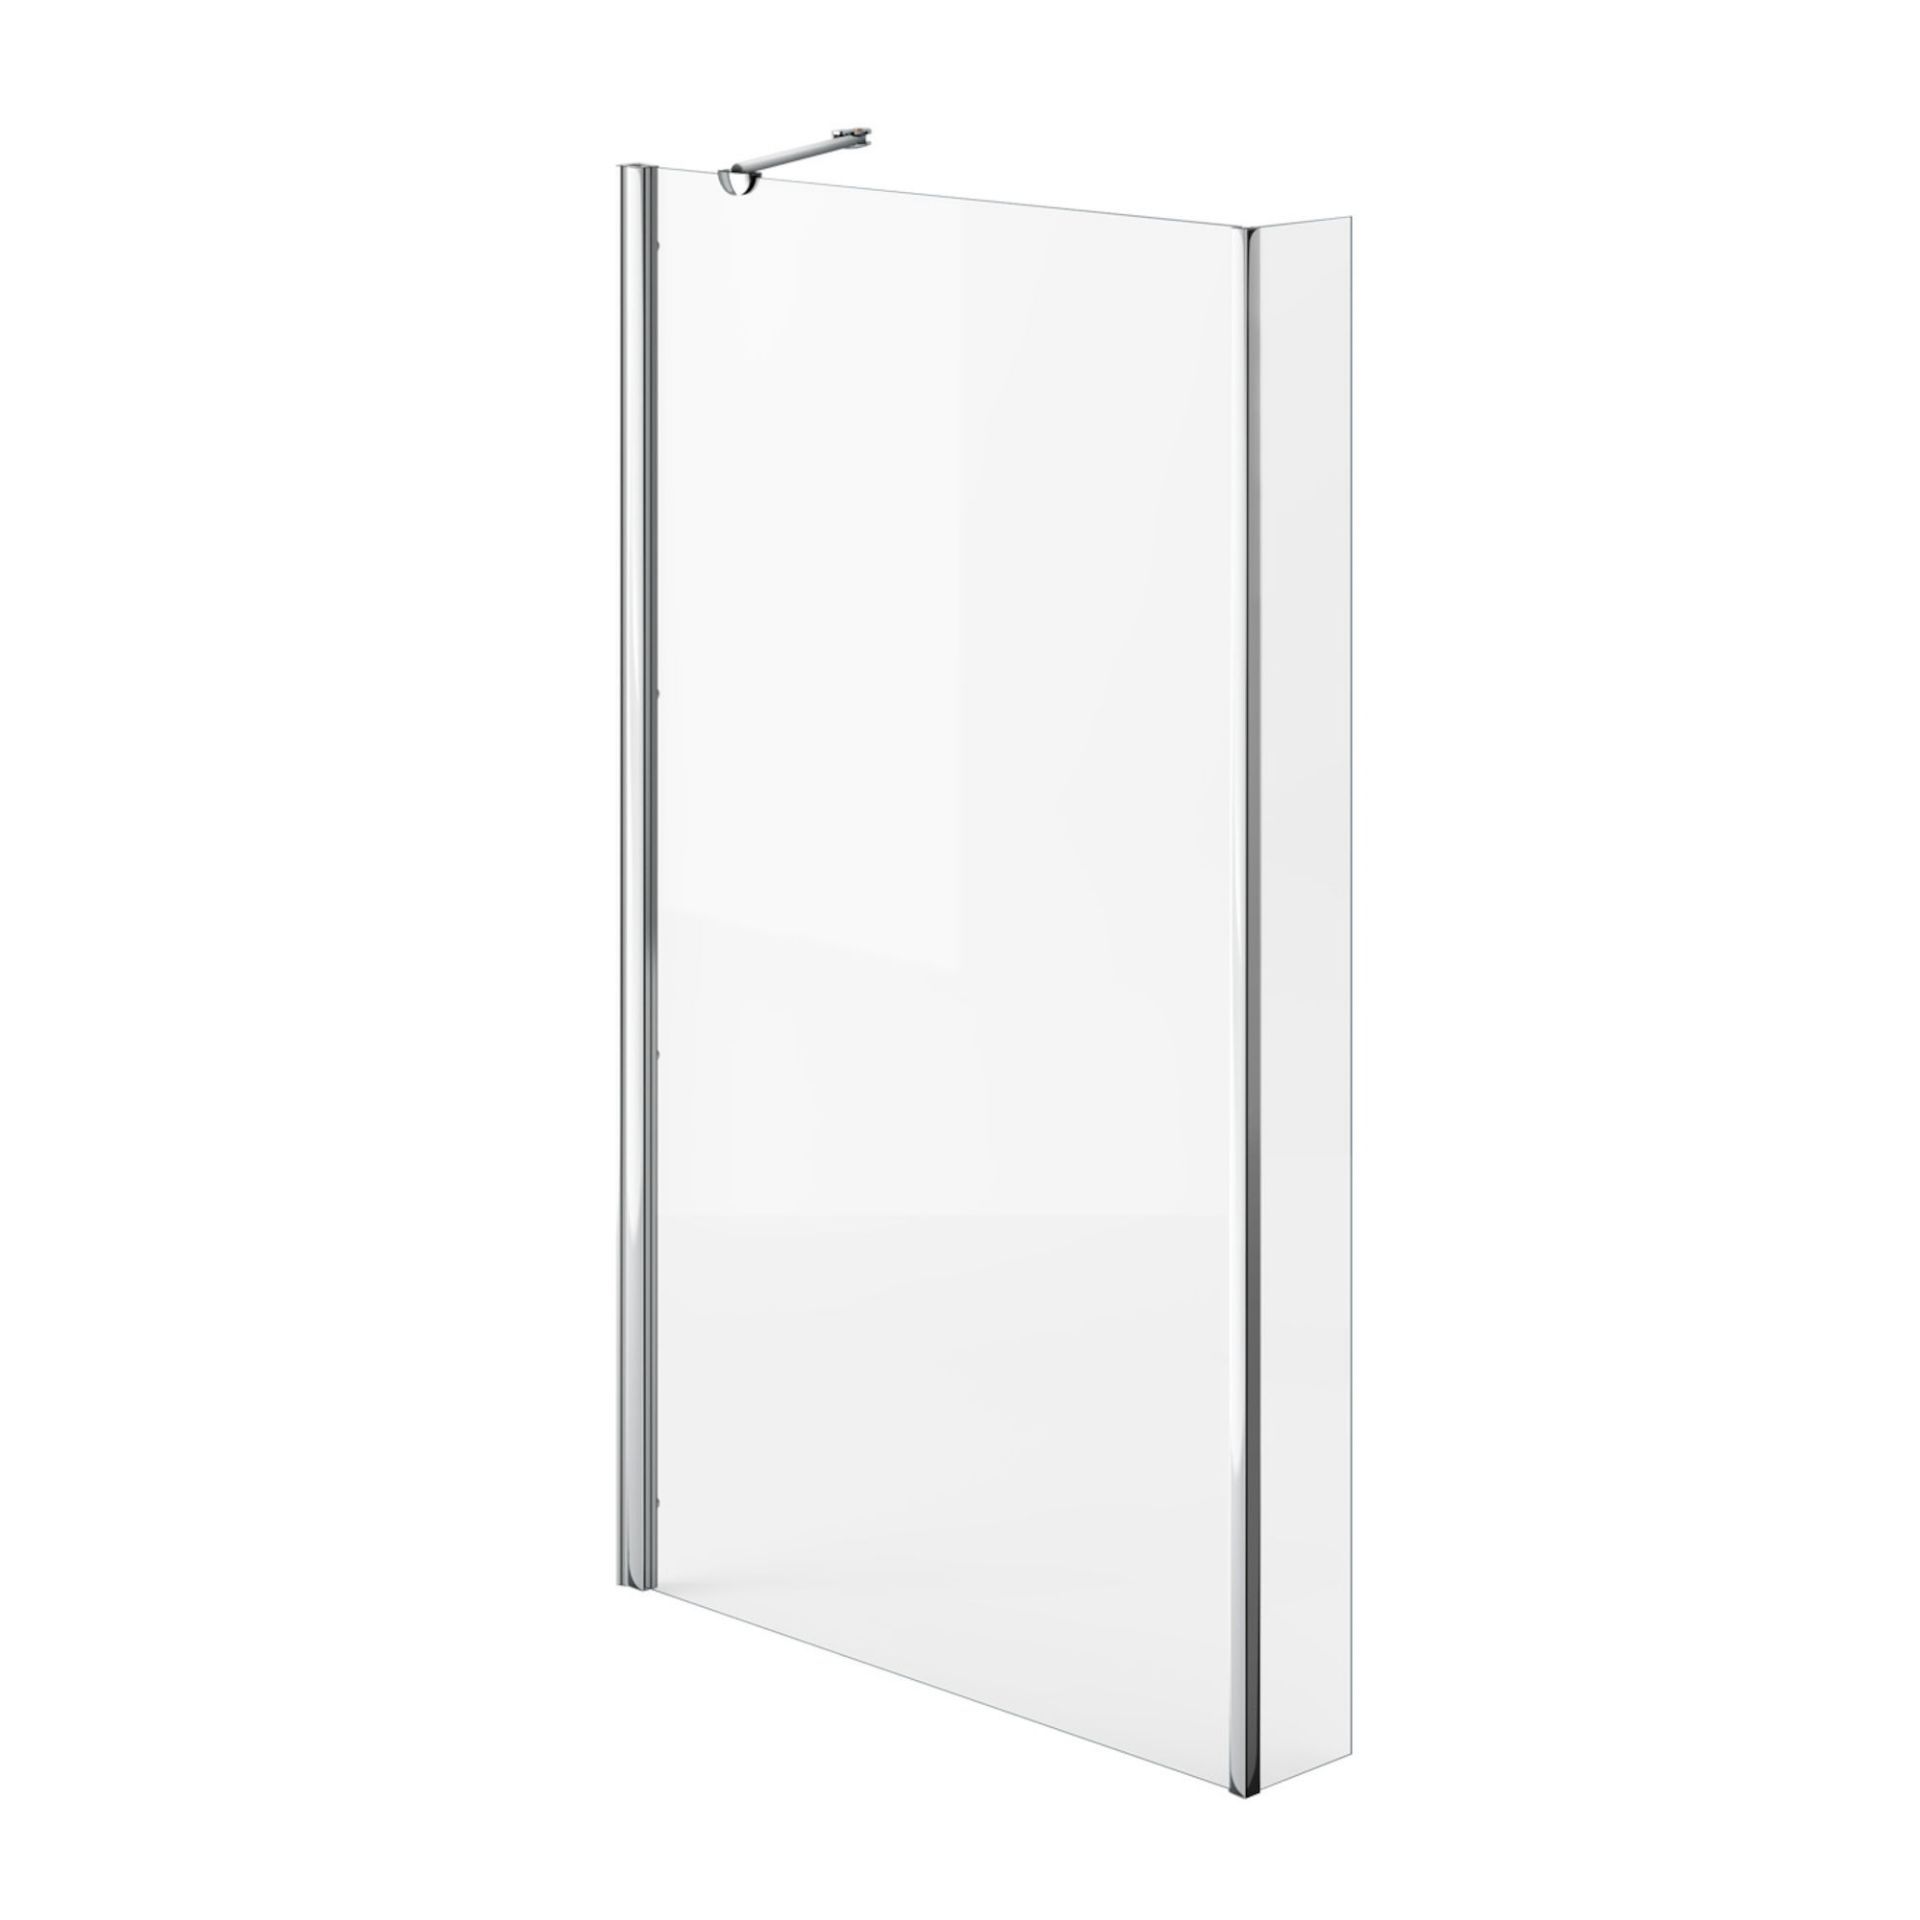 New (D81) 1500x815mm L Shape Bath Screen. RRP £189.99. 4mm Tempered Safety Glass Screen Come...